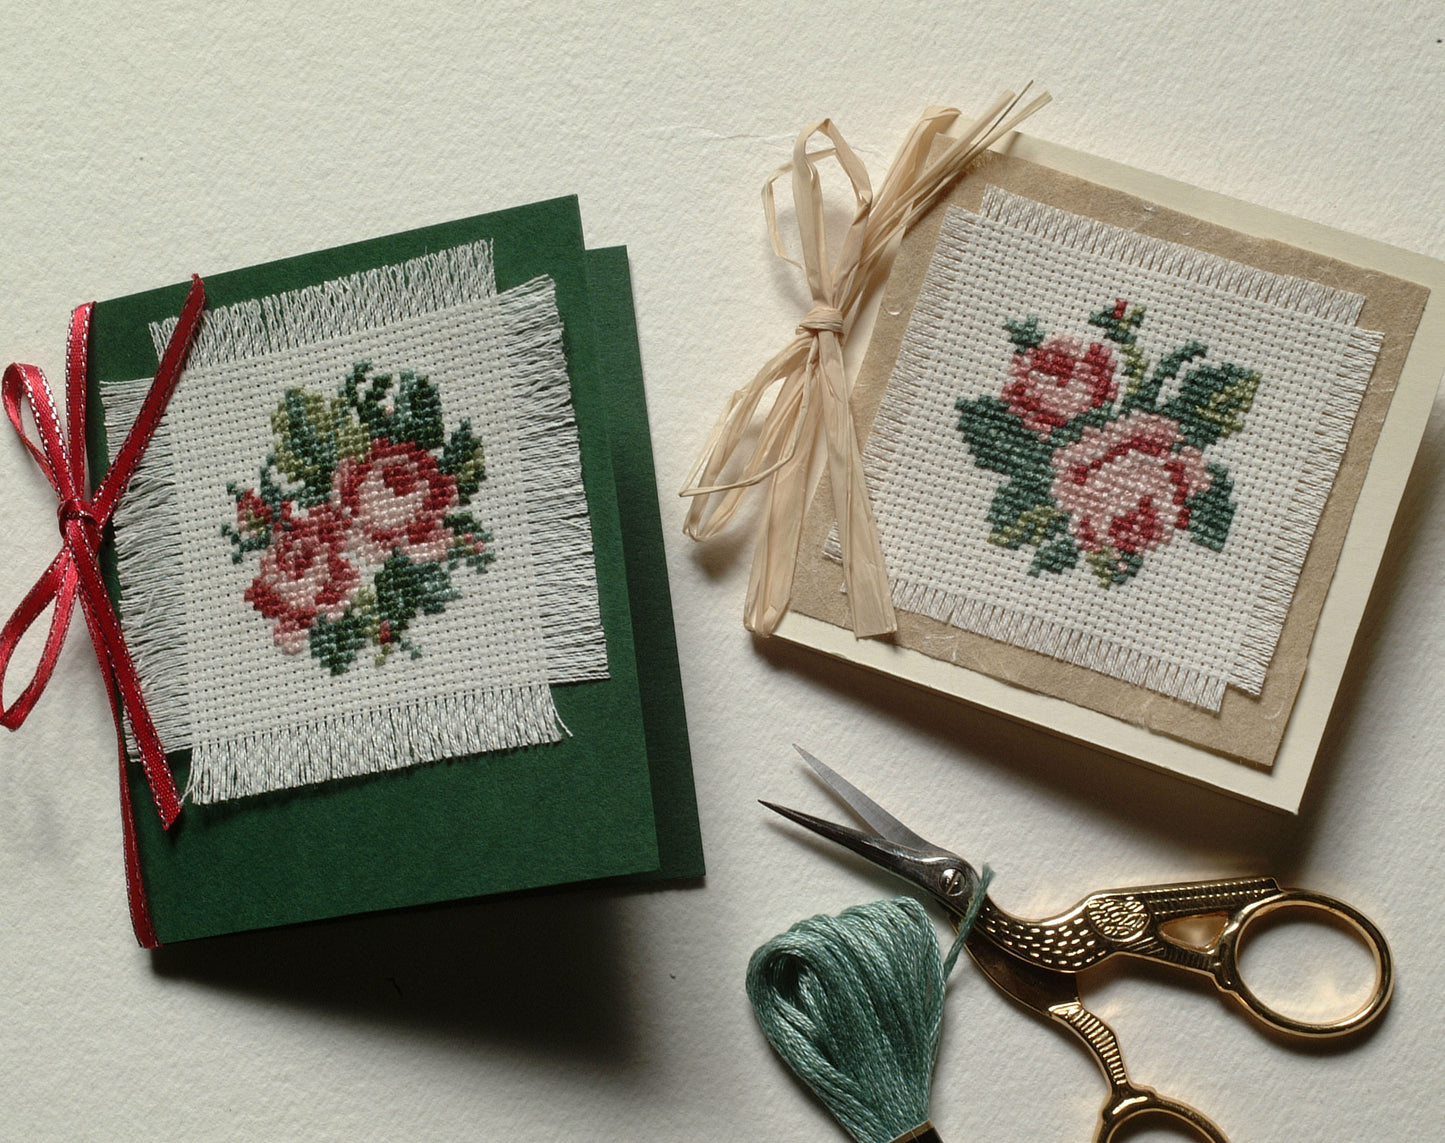 The Cross Stitch Guild Design and Pattern Book, by Jane Greenoff and Sue Hawkins